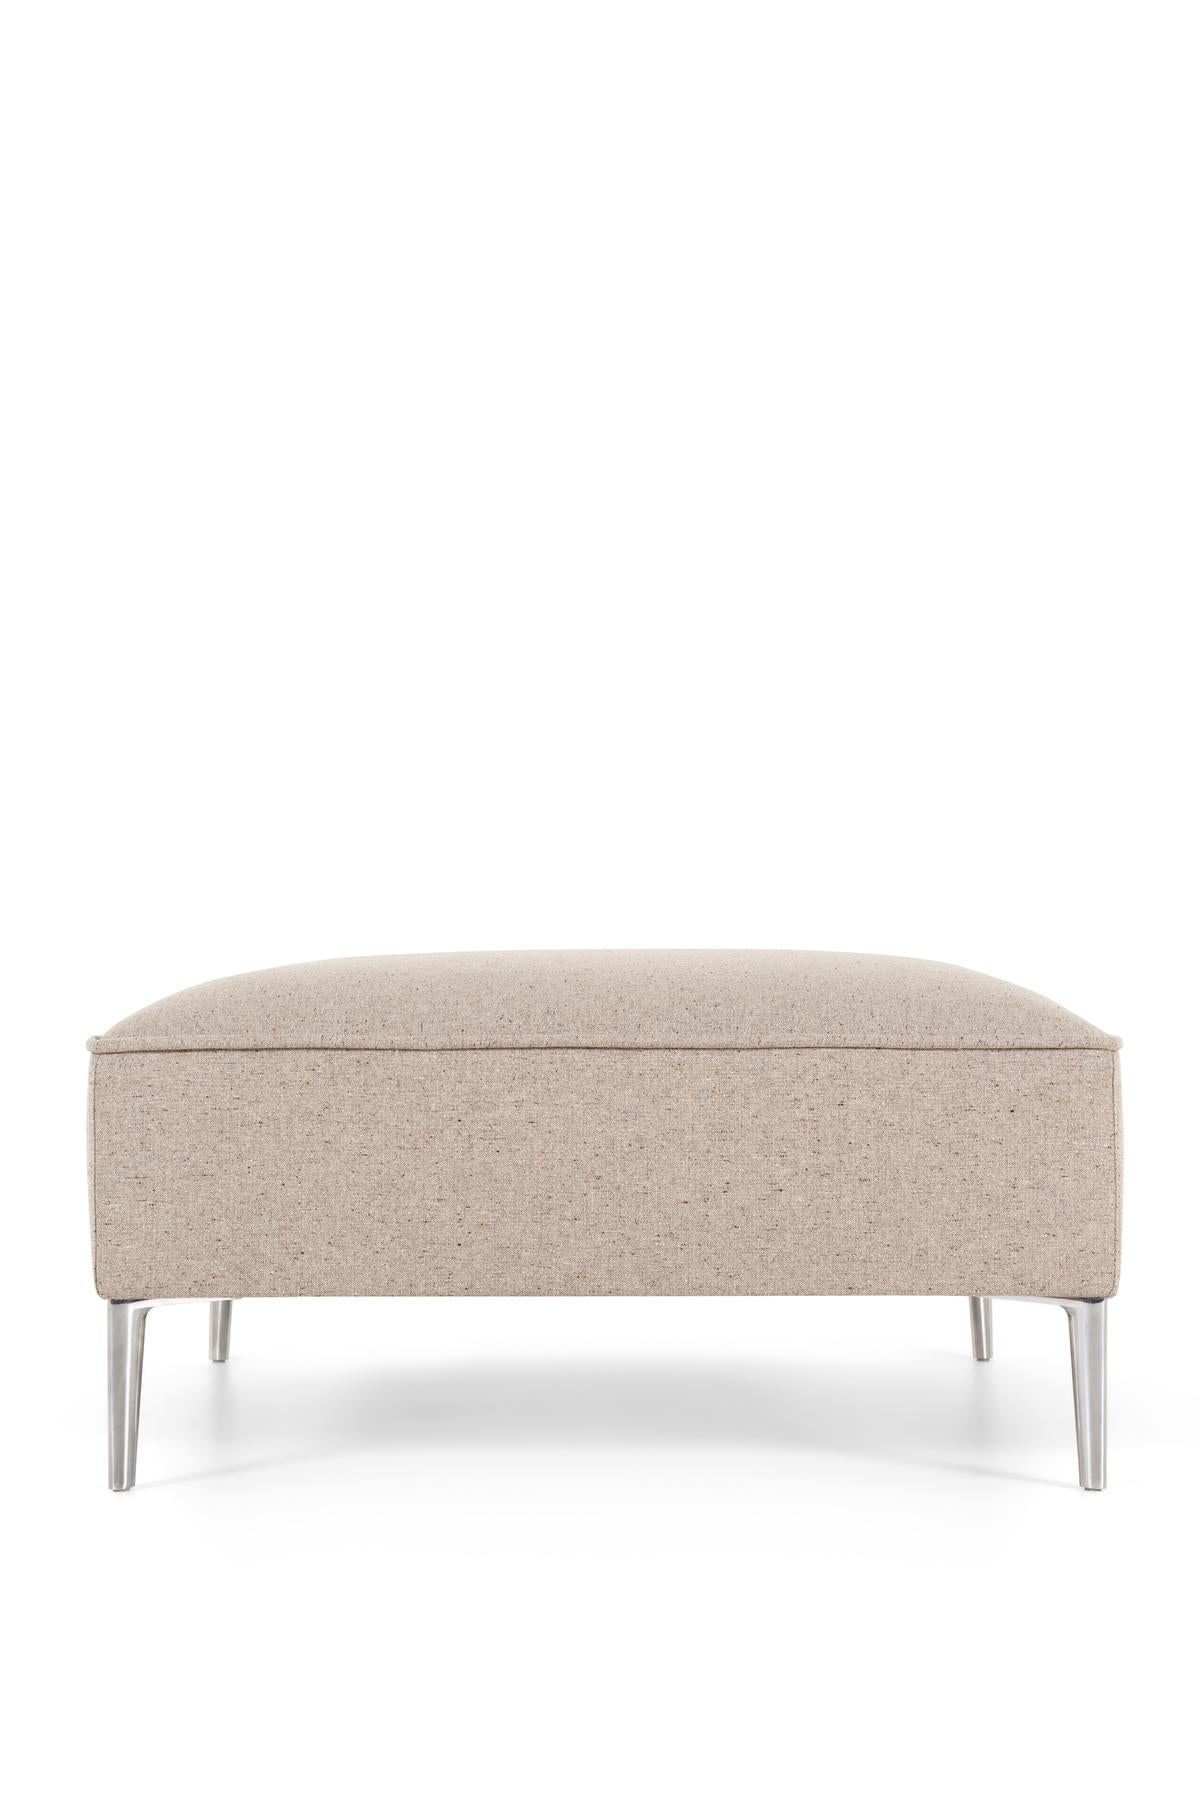 Moooi Sofa So Good Footstool in Solis Paper Upholstery & Polished Aluminum Feet In New Condition For Sale In Brooklyn, NY